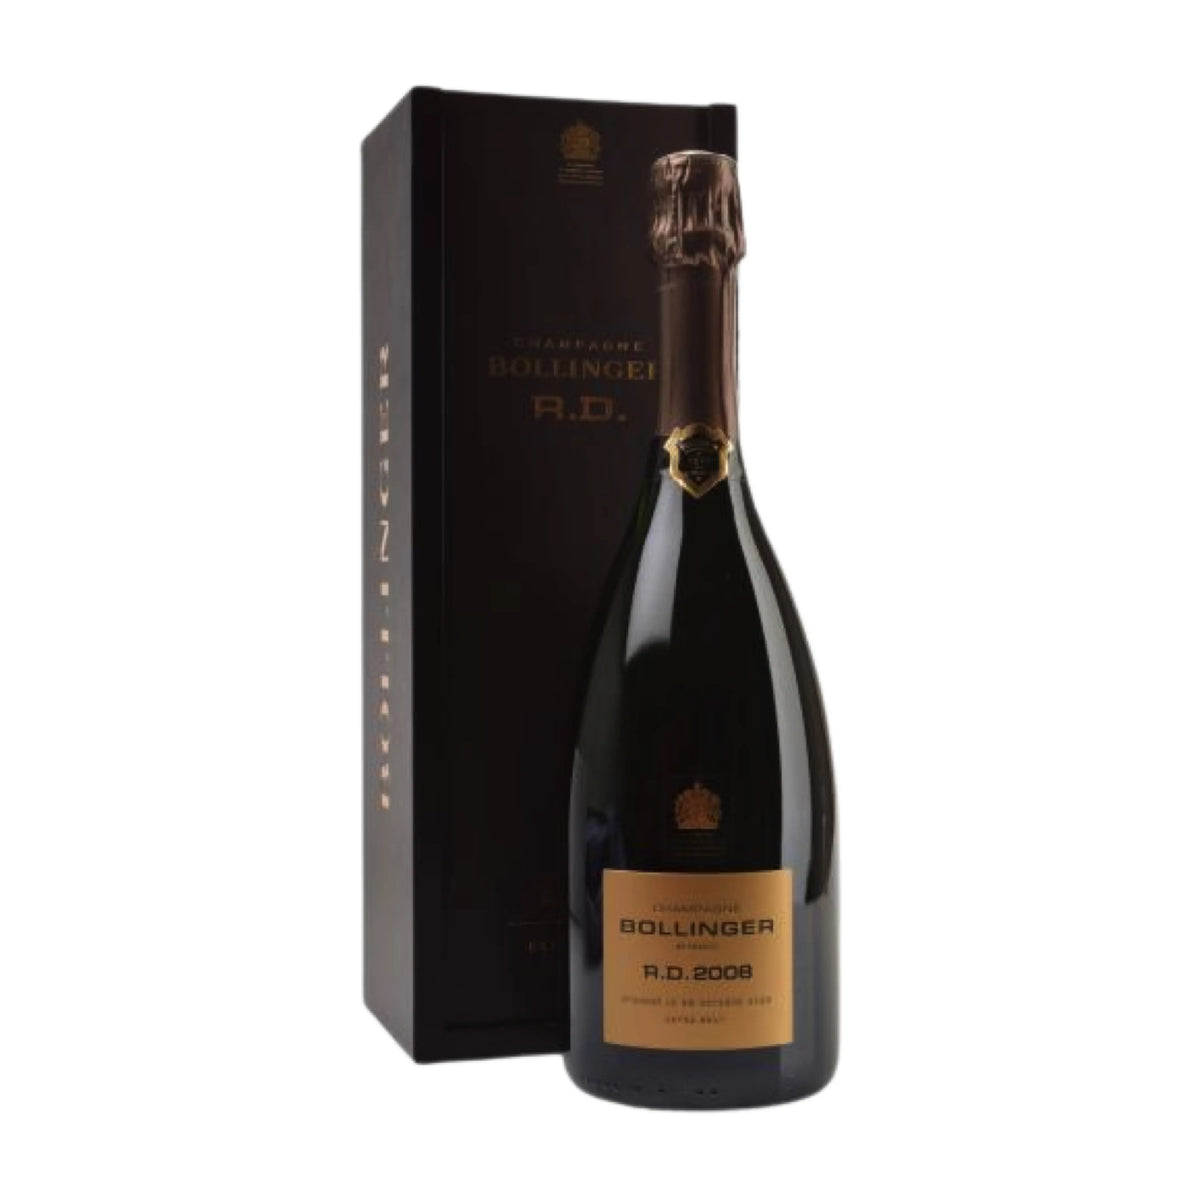 Champagne Bollinger-Champagner-Pinot Noir, Chardonnay-2008 R.D. Champagne AOC-WINECOM